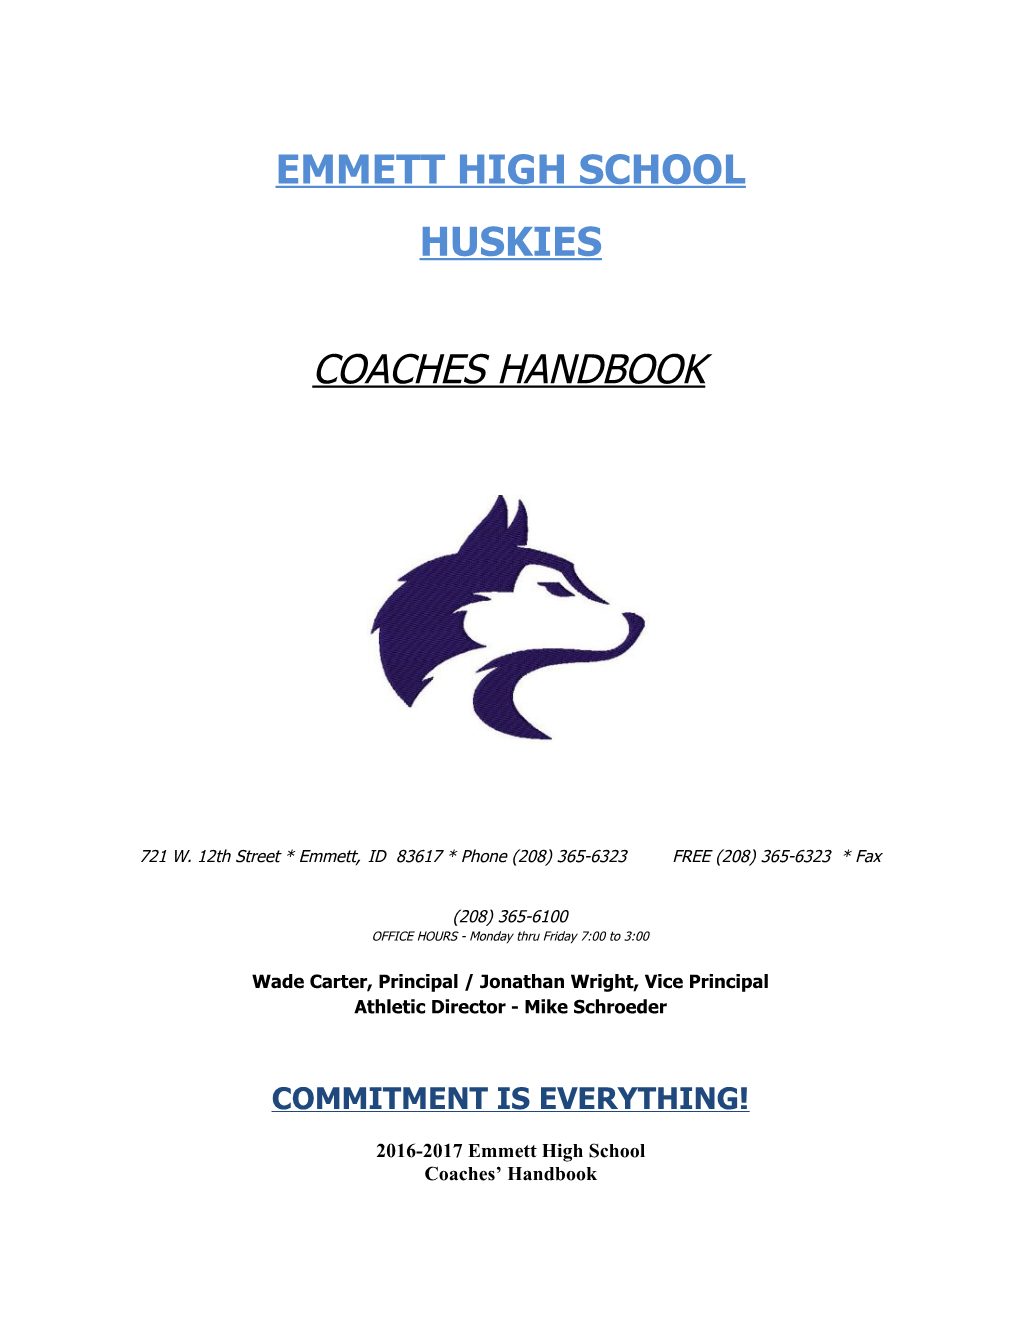 As a Coach in the Emmett School District You Are Going to Have a Profound Effect Upon The